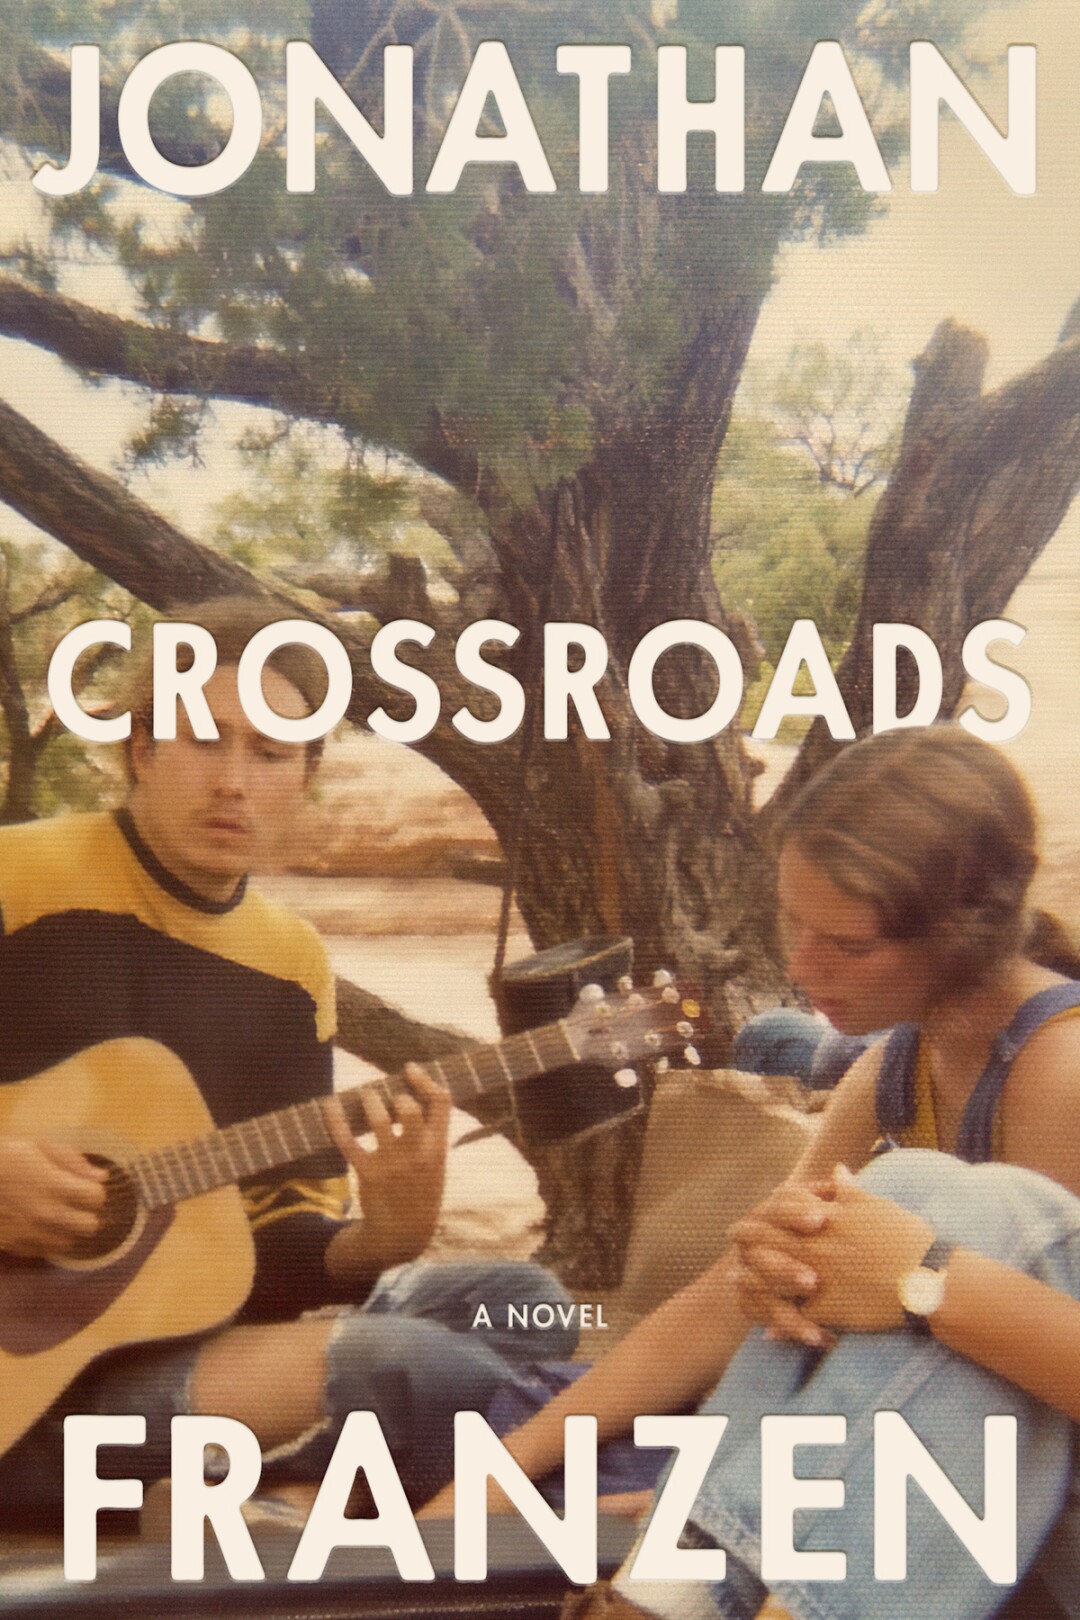 A man playing the guitar and a woman are sitting outside on the blanket of "Crossroads," by Jonathan Franzen.